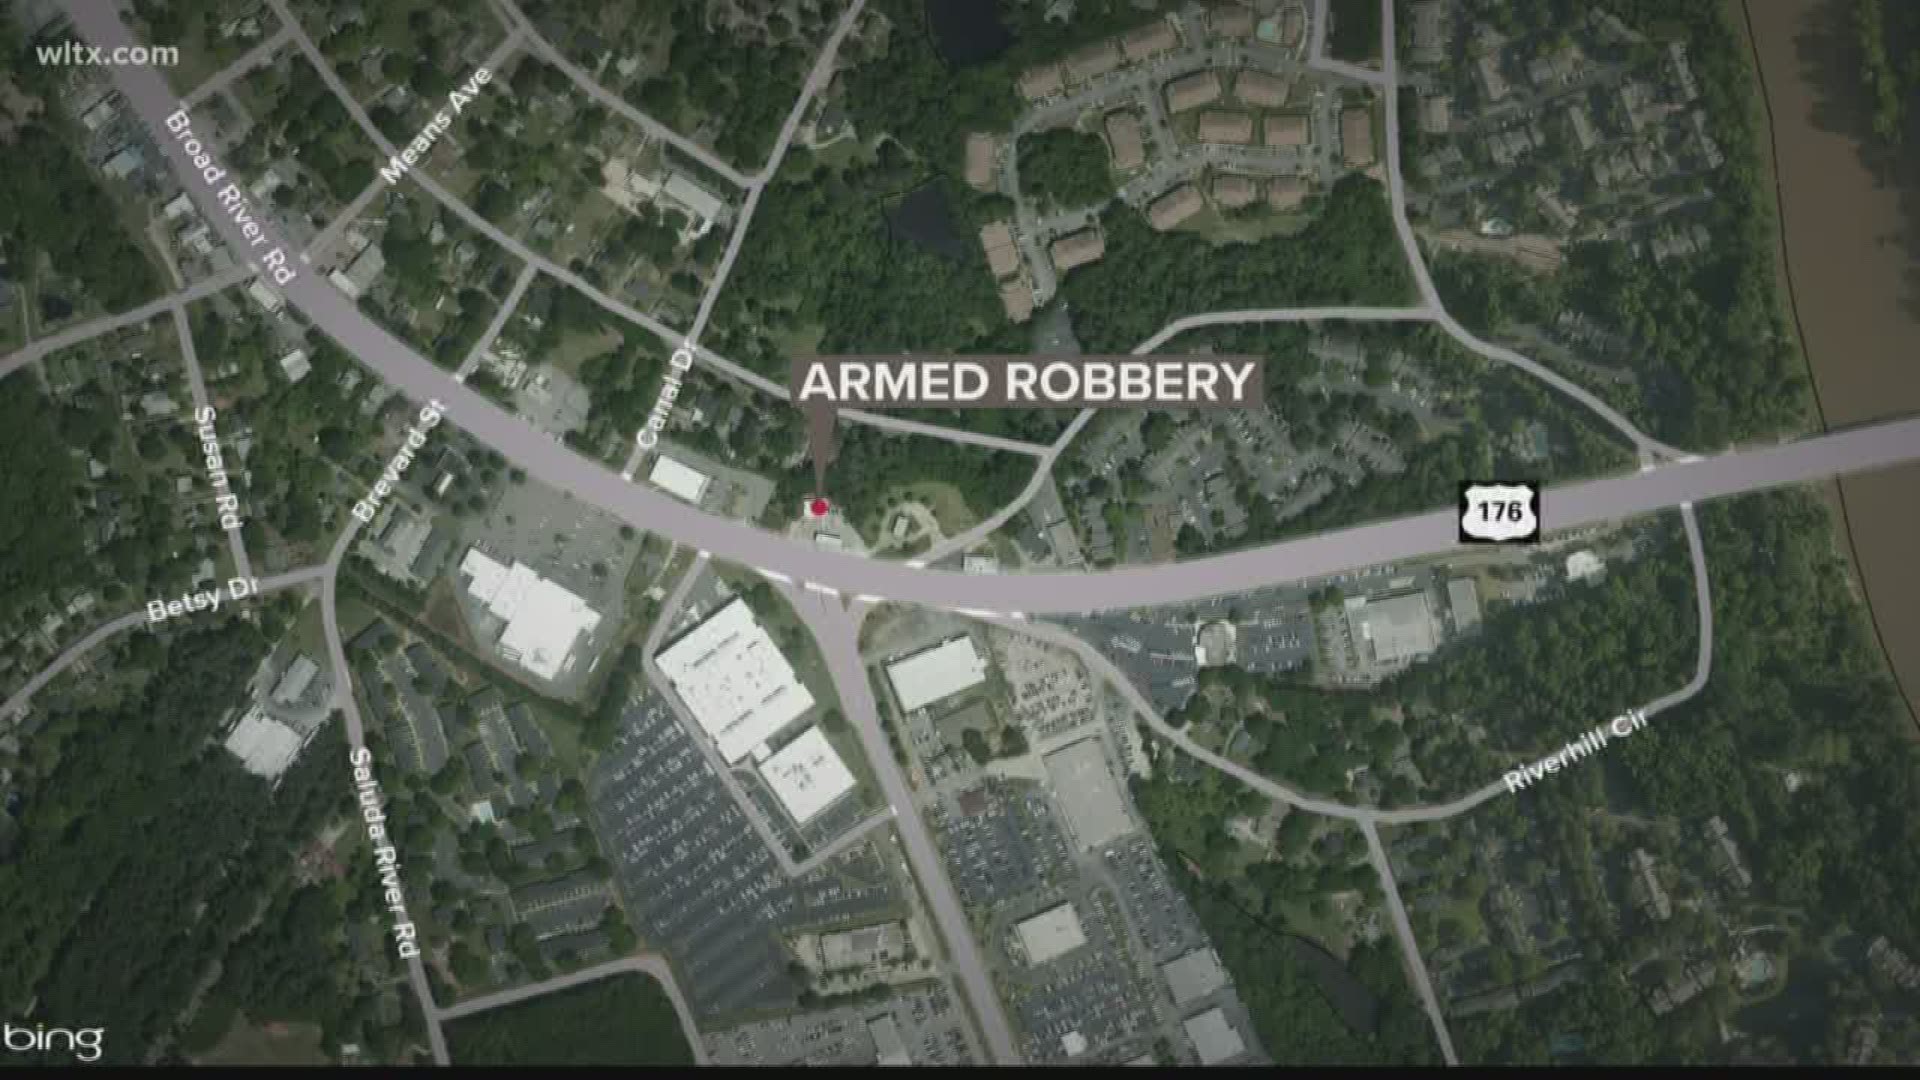 Richland County Deputies are investigating after an armed robbery at a convenience store on Broad River Road Tuesday night.